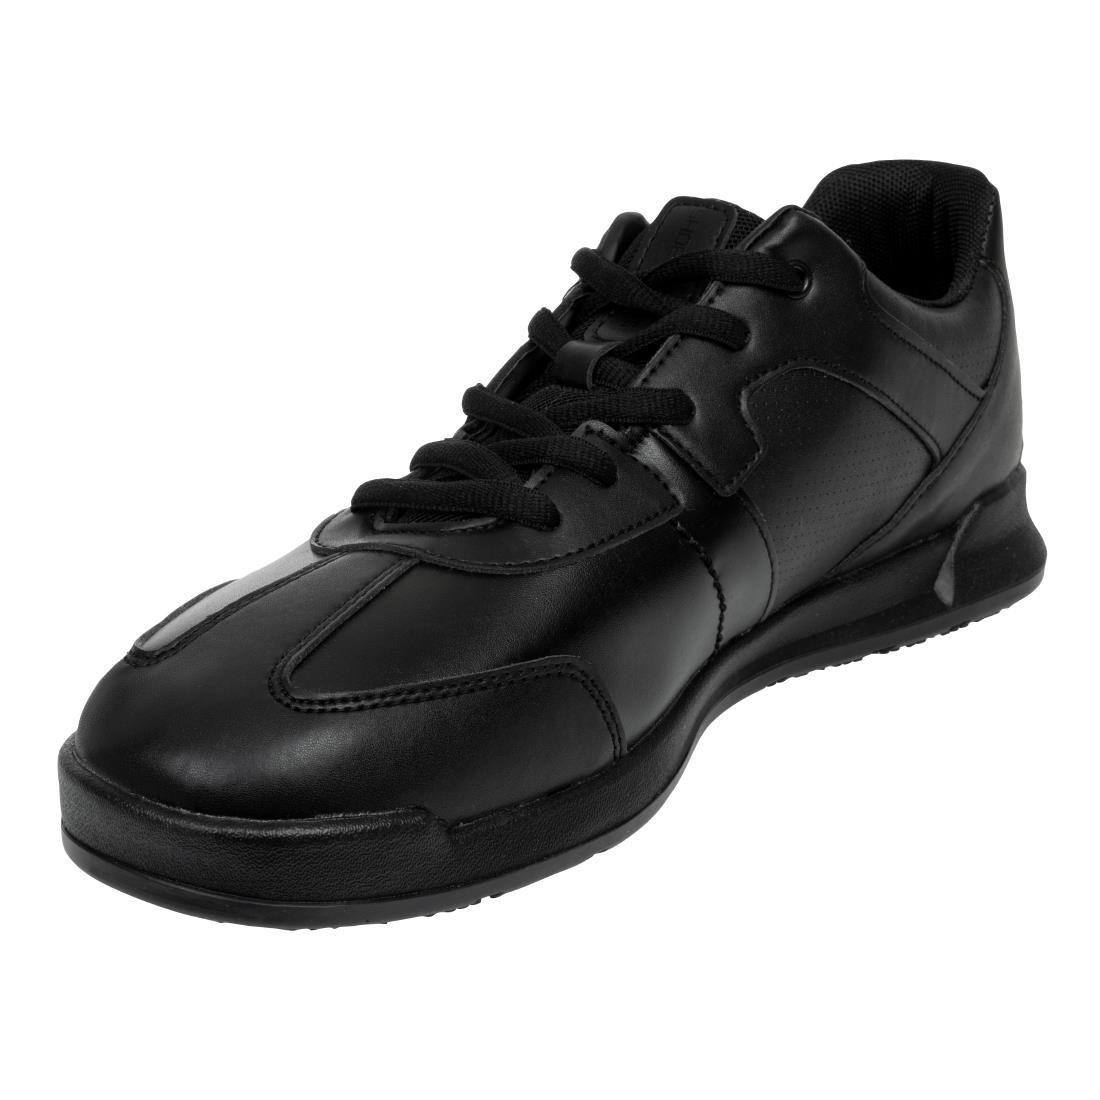 BB585-46 Shoes for Crews Freestyle Trainers Black Size 46